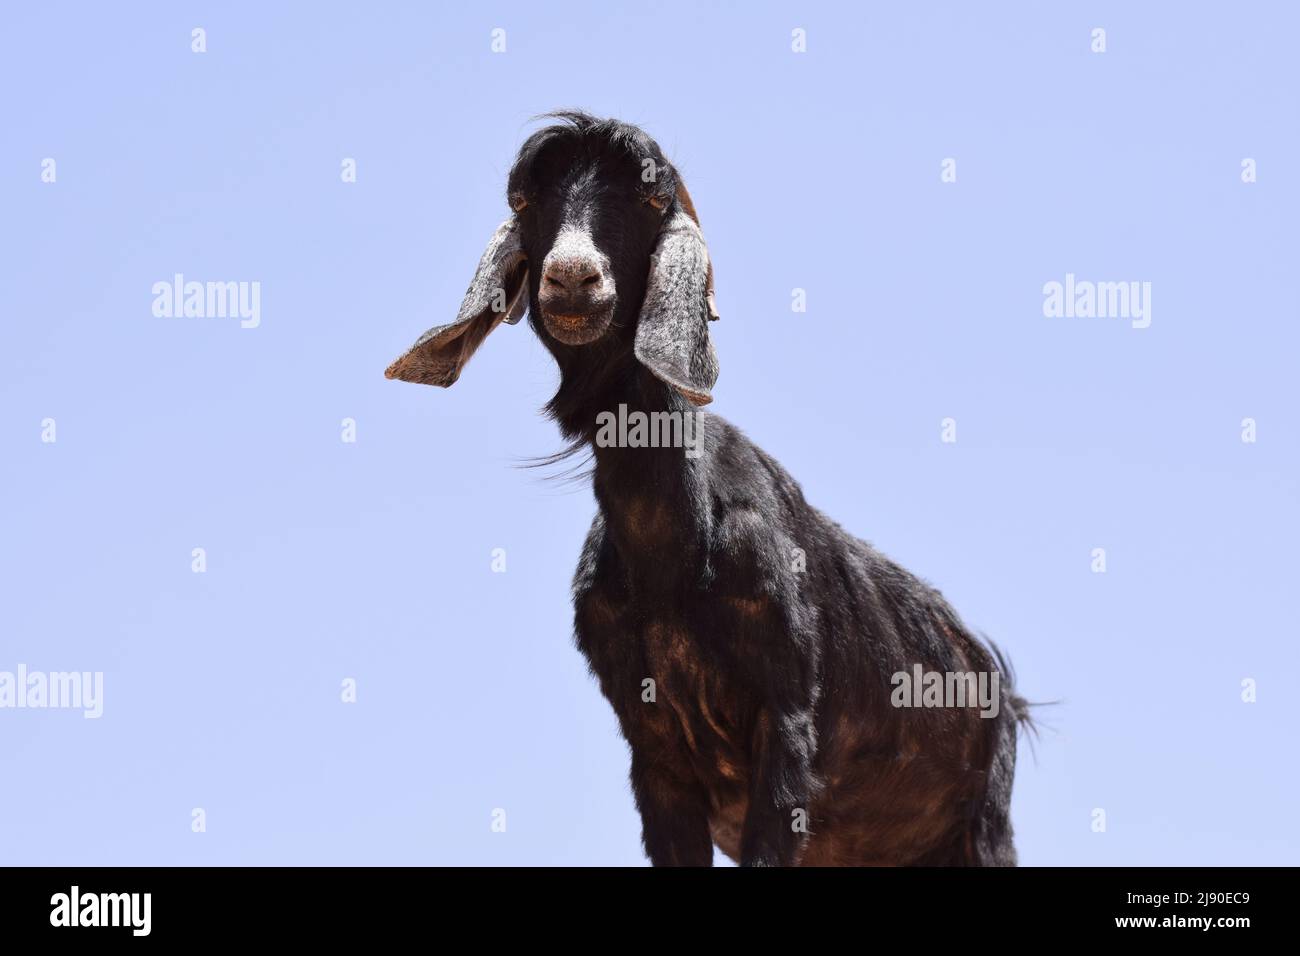 A black goat with a white nose standing on a high rock looking down at the camera grinning Stock Photo